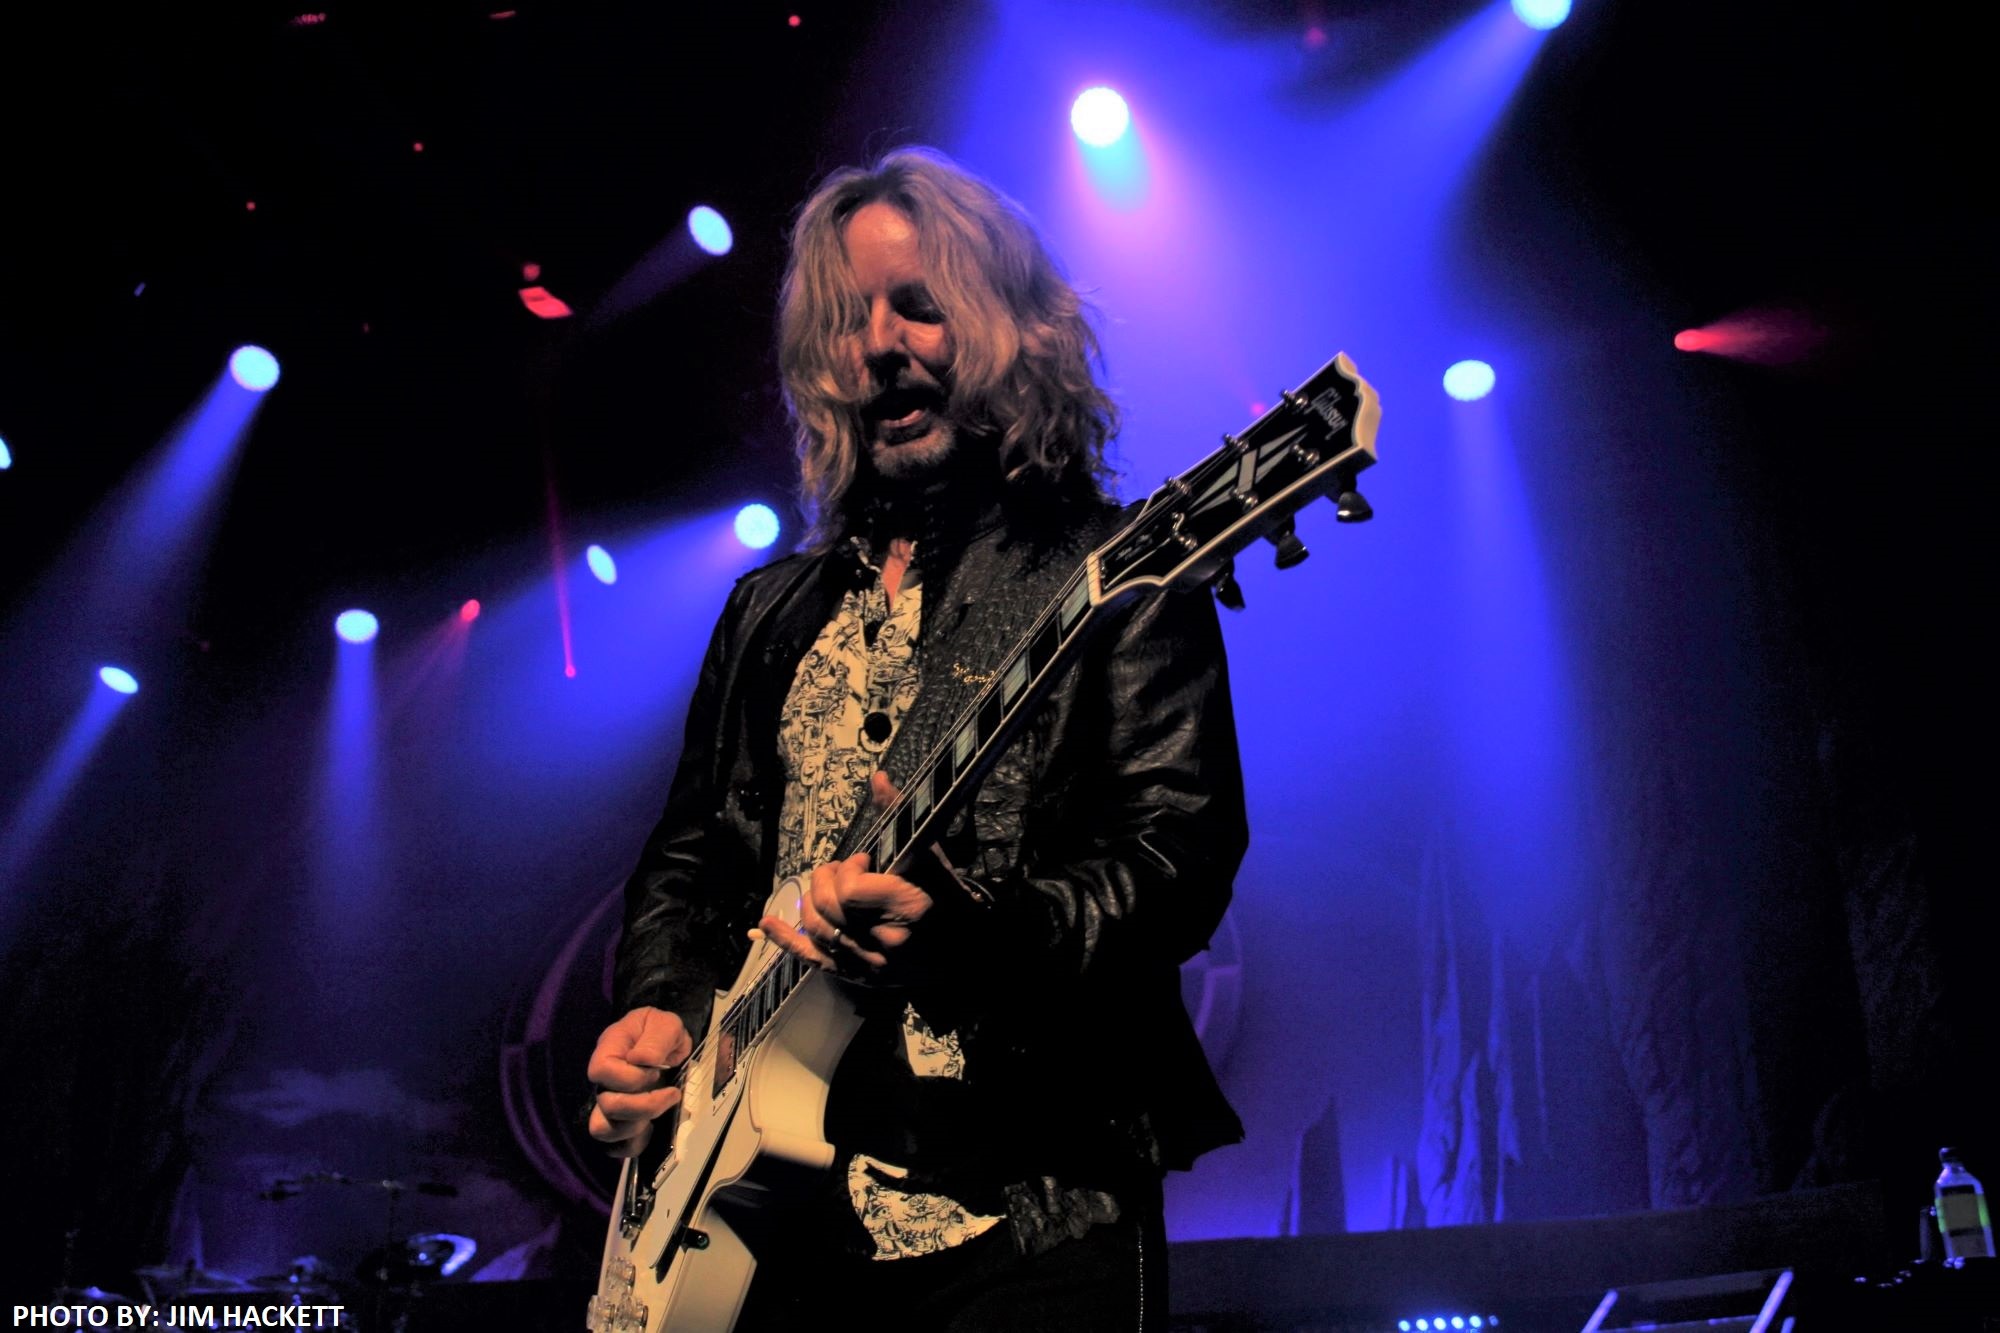 Styx Live at Premier Theater at Foxwoods Resort in Mashantucket, CT May 13, 2023